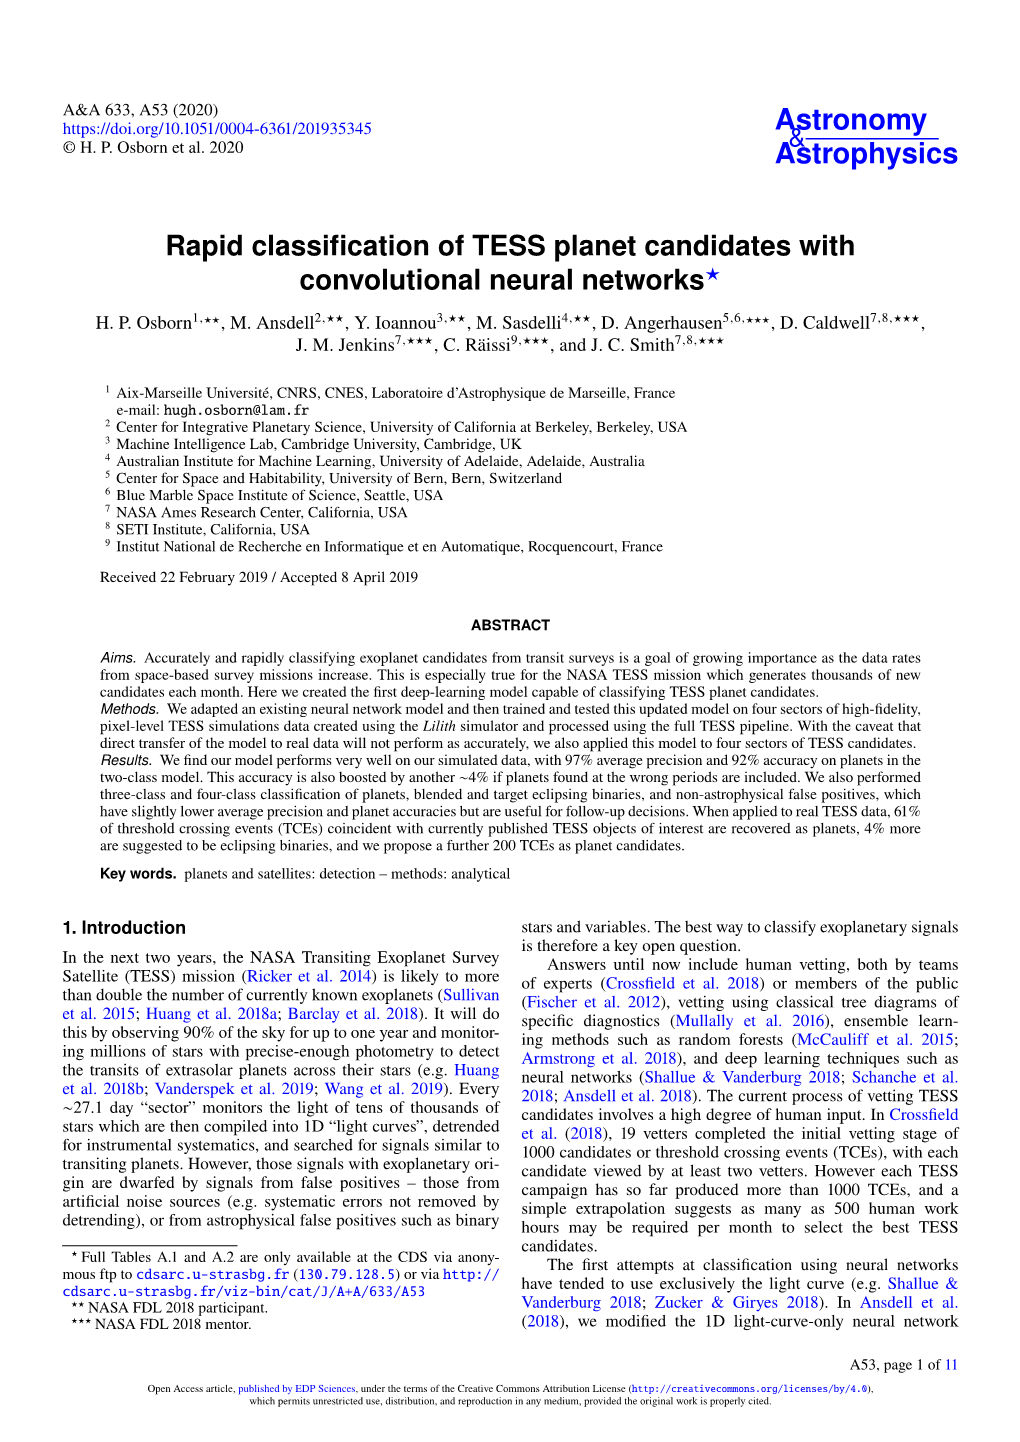 Rapid Classification of TESS Planet Candidates with Convolutional